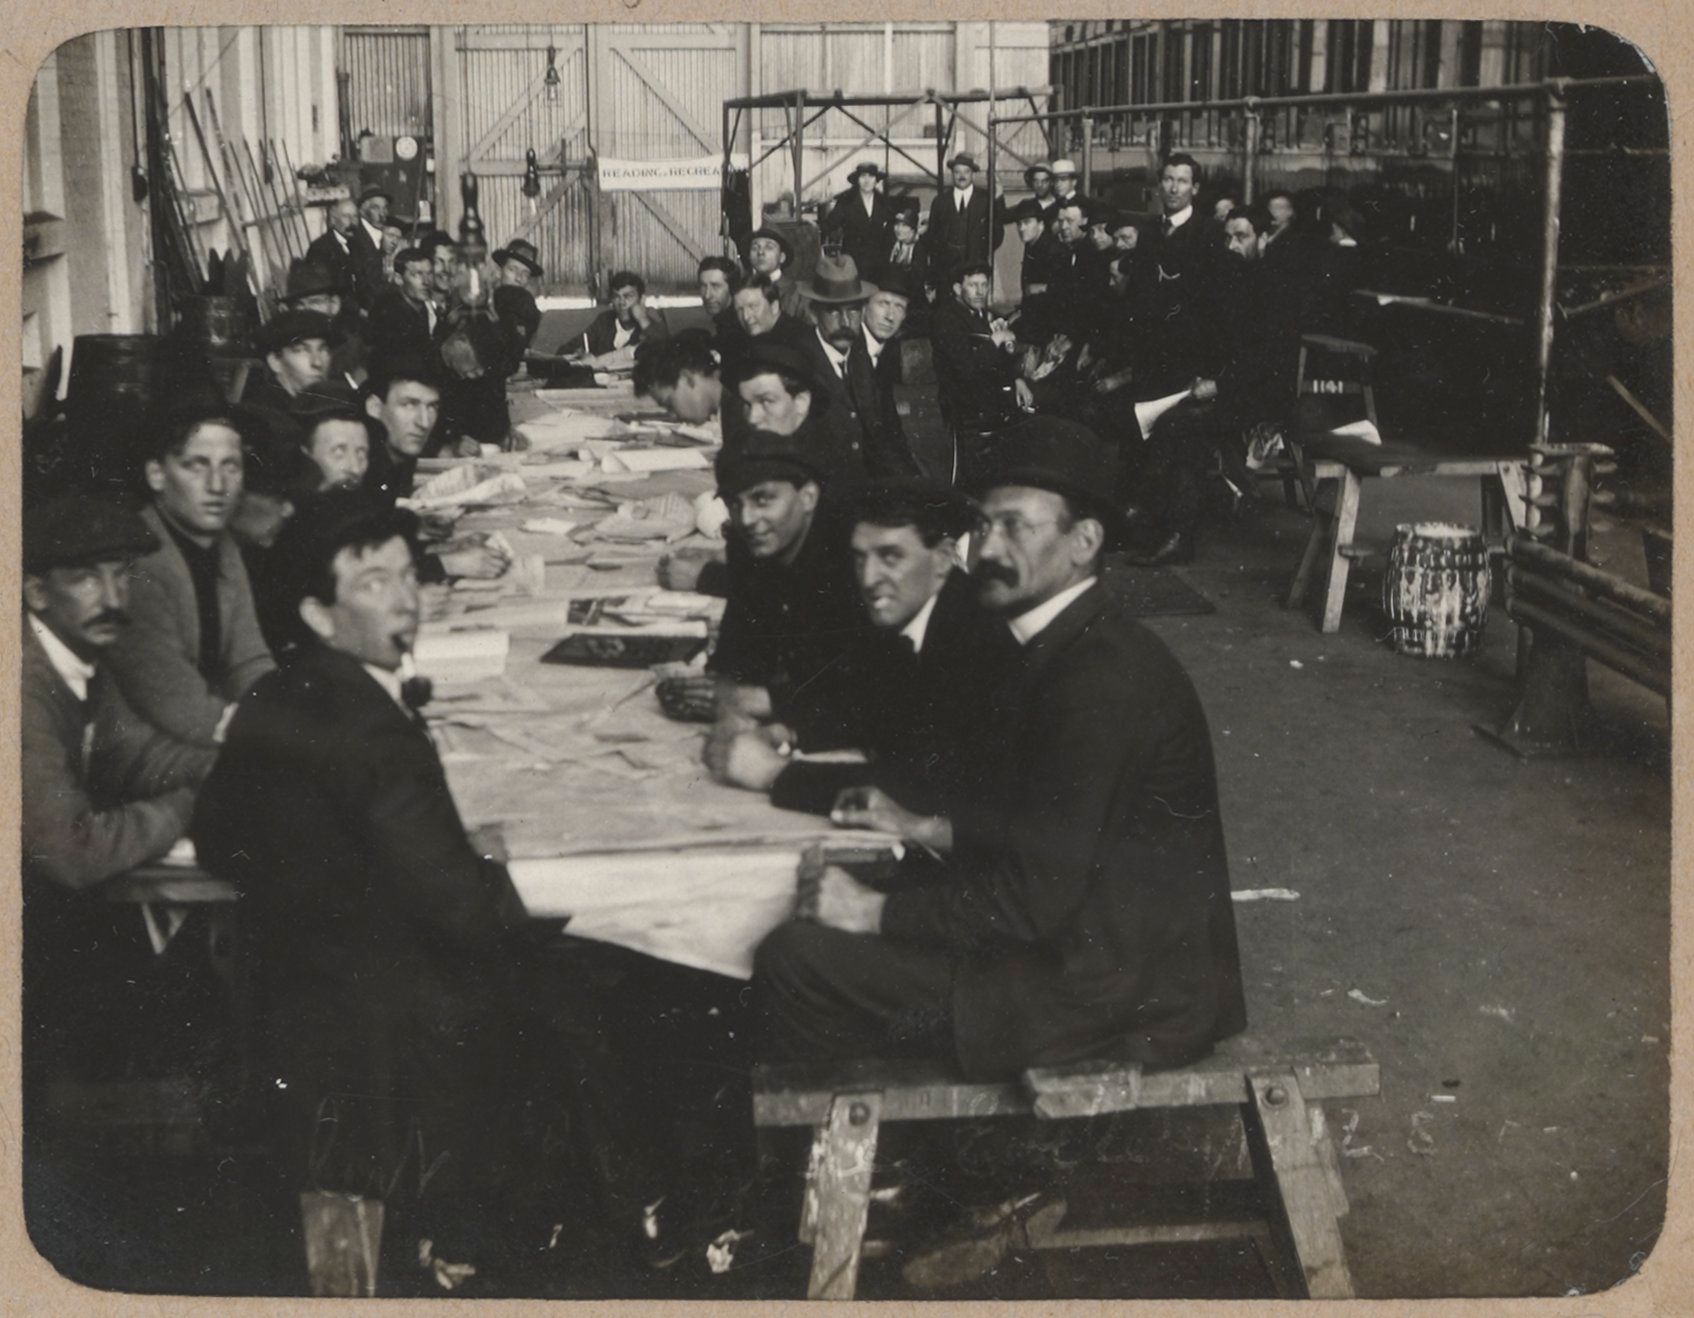 Men sit at long tables reading newspapers